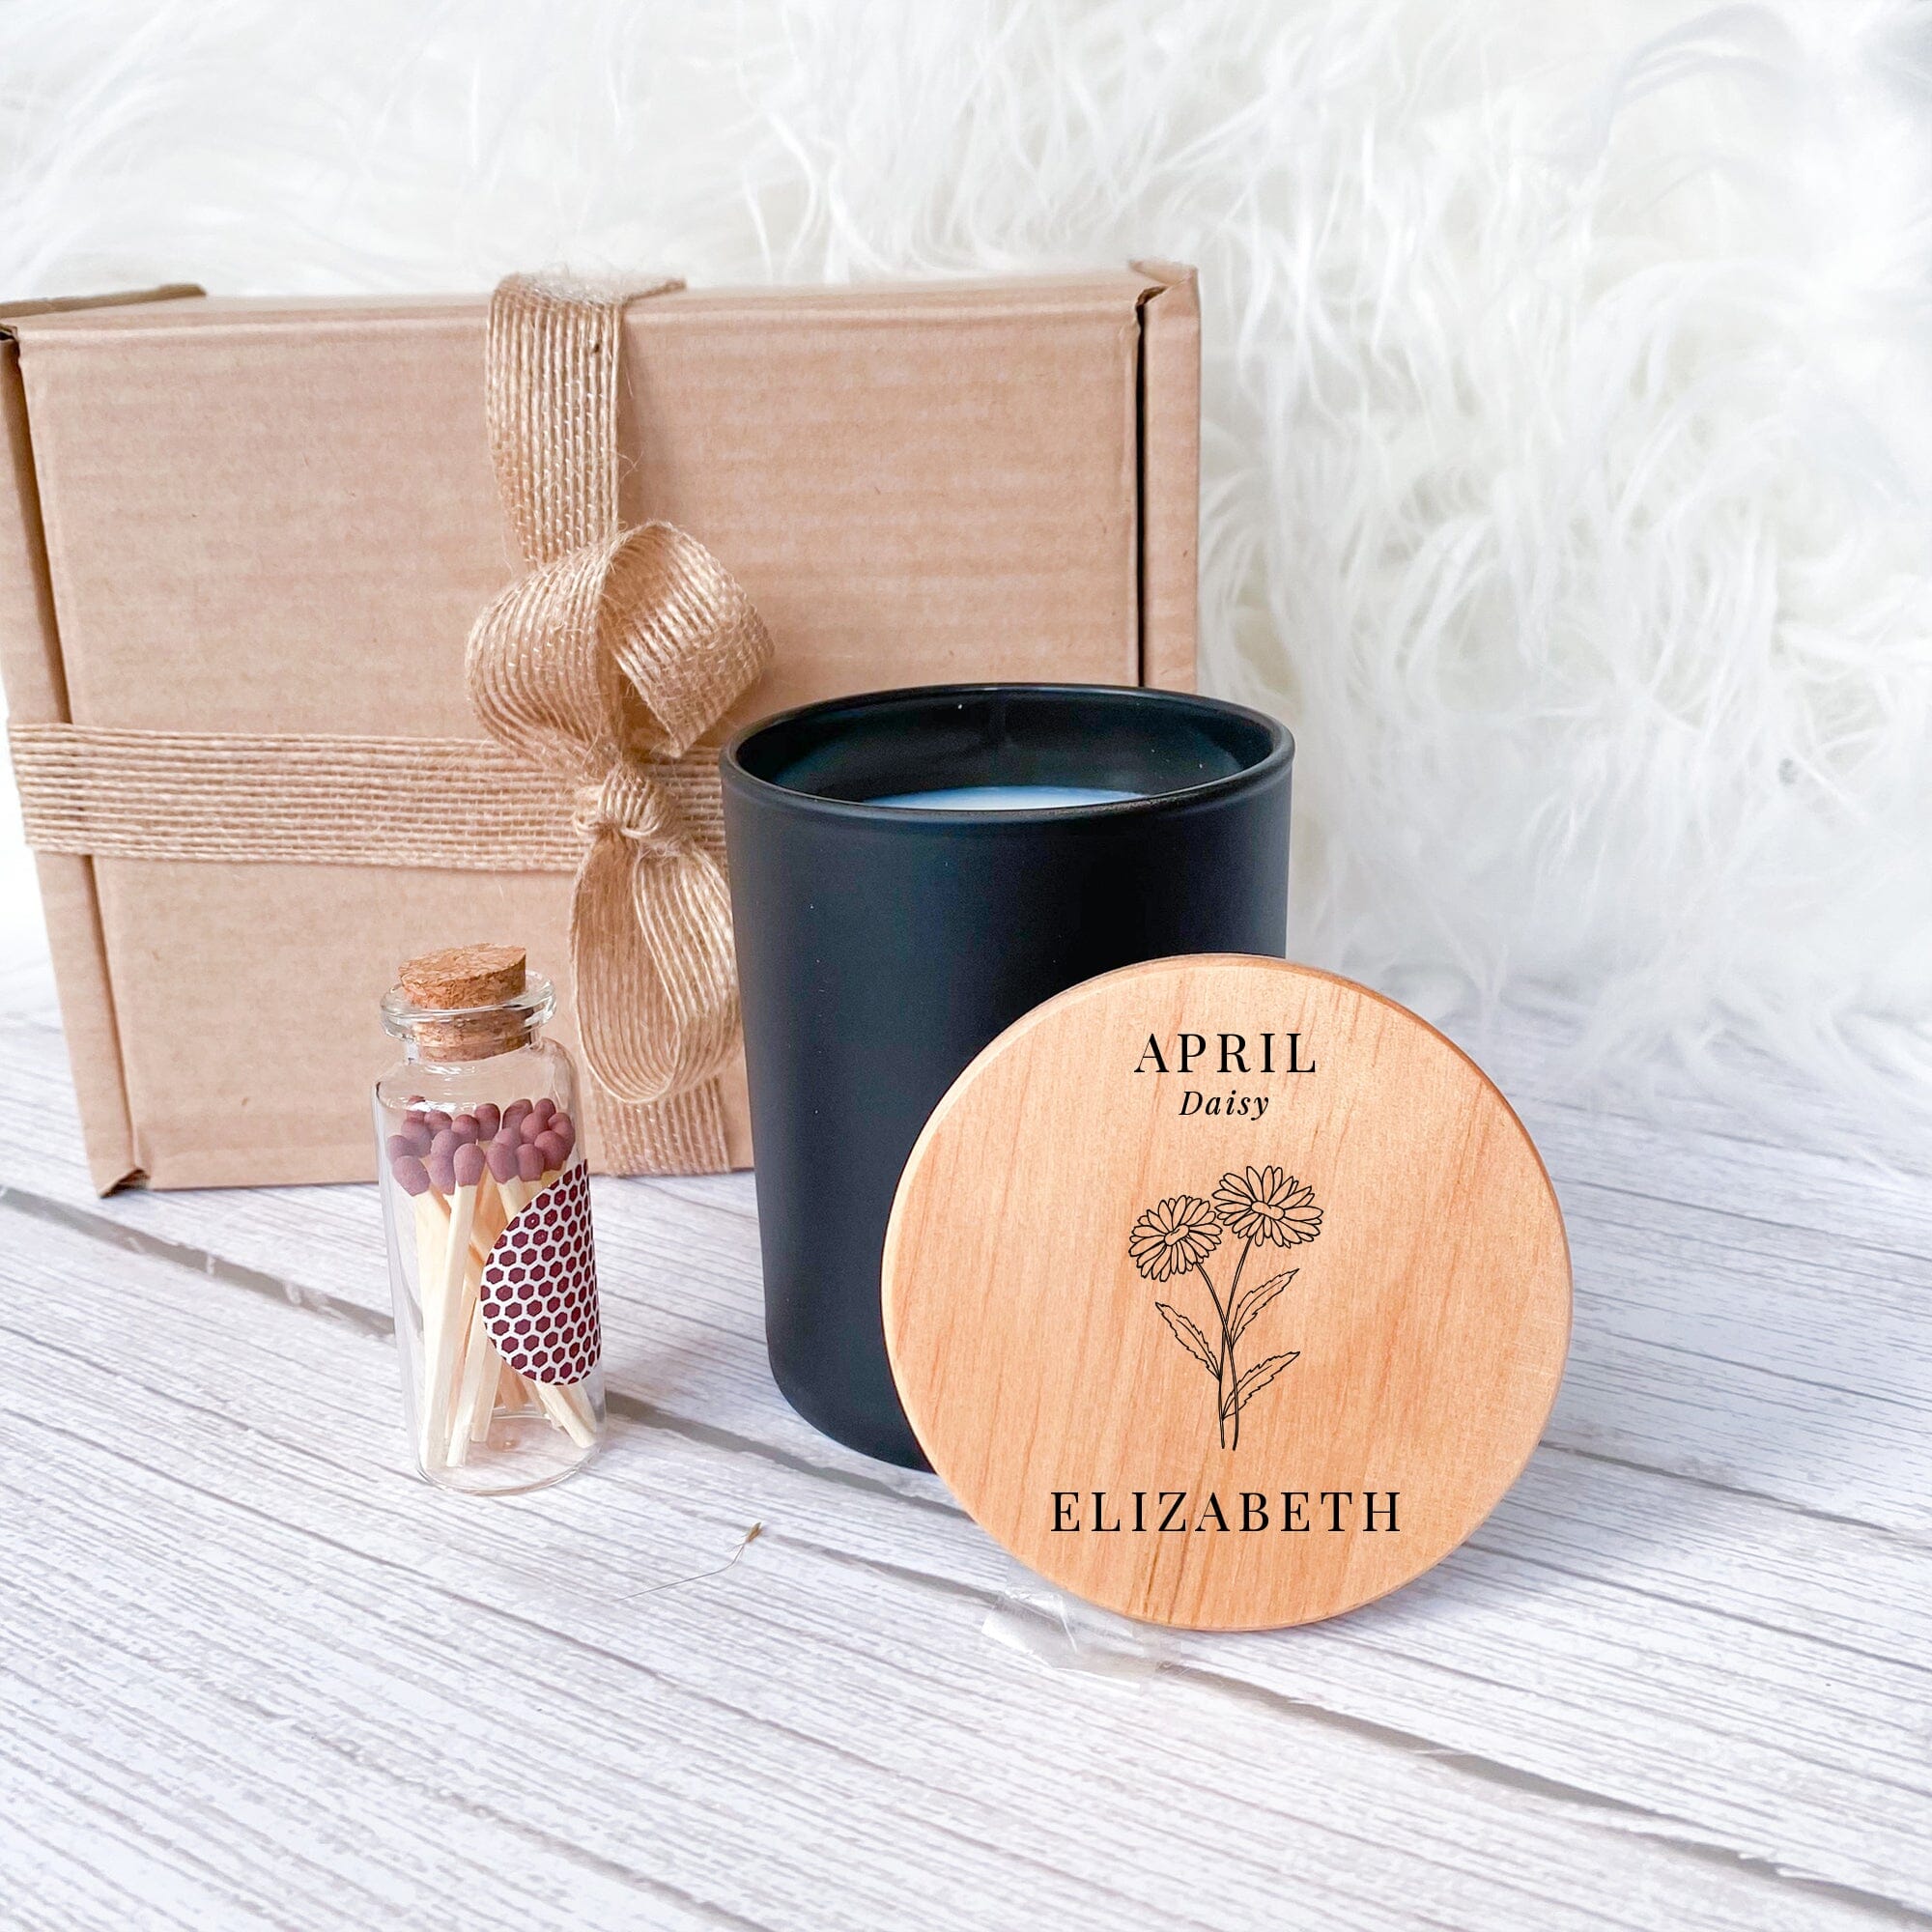 Personalised Engraving Birth Flower Candle, Birthday Gift for January February March April May June July August September October December